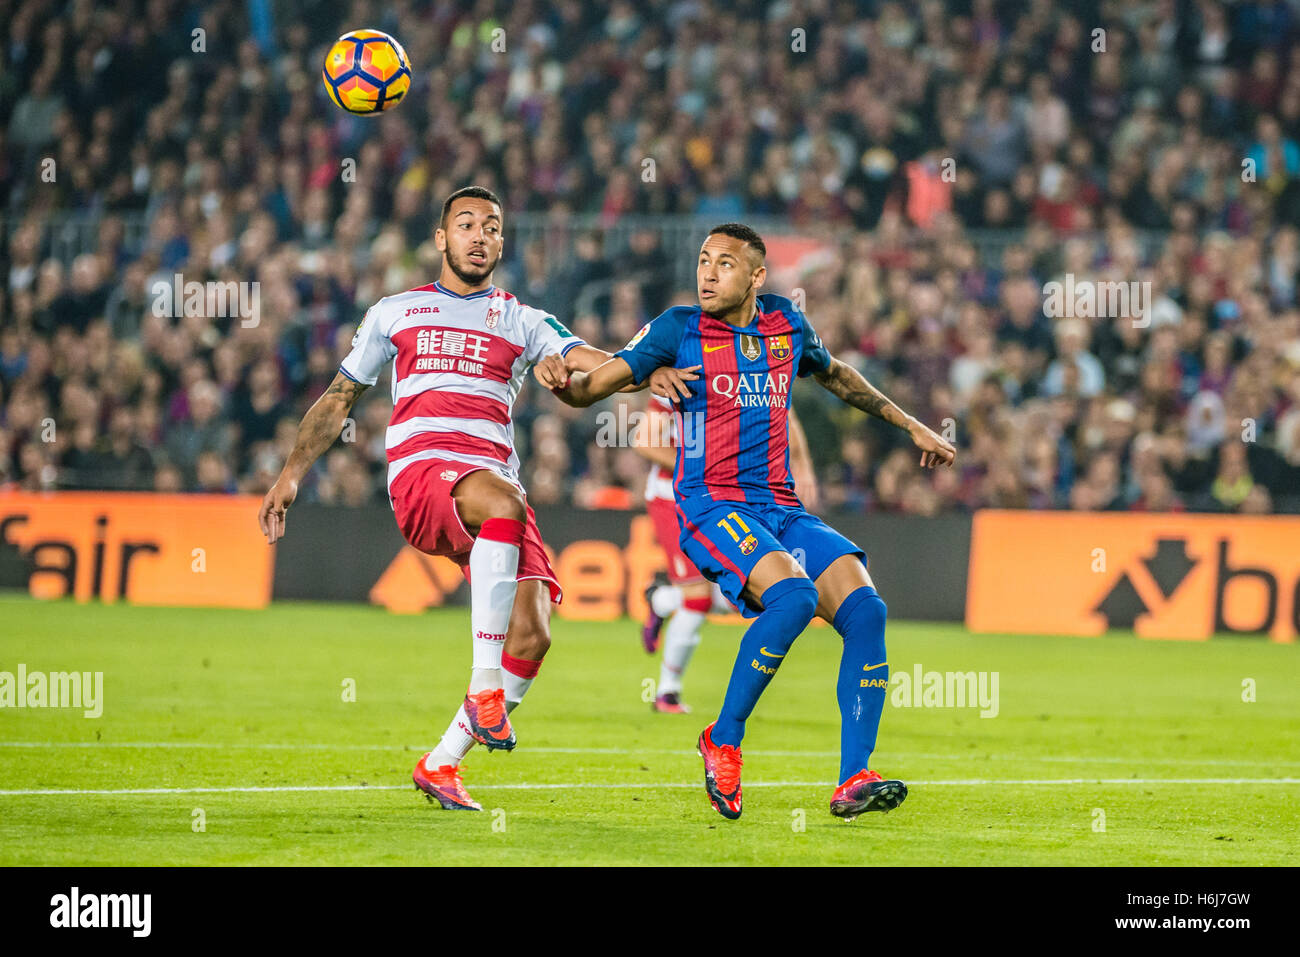 Barcelona, Catalonia, Spain. 29th Oct, 2016. FC Barcelona forward NEYMAR JR. competes for the ball during the LaLiga match between FC Barcelona and Granada CF at the Camp Nou stadium in Barcelona © Matthias Oesterle/ZUMA Wire/Alamy Live News Stock Photo